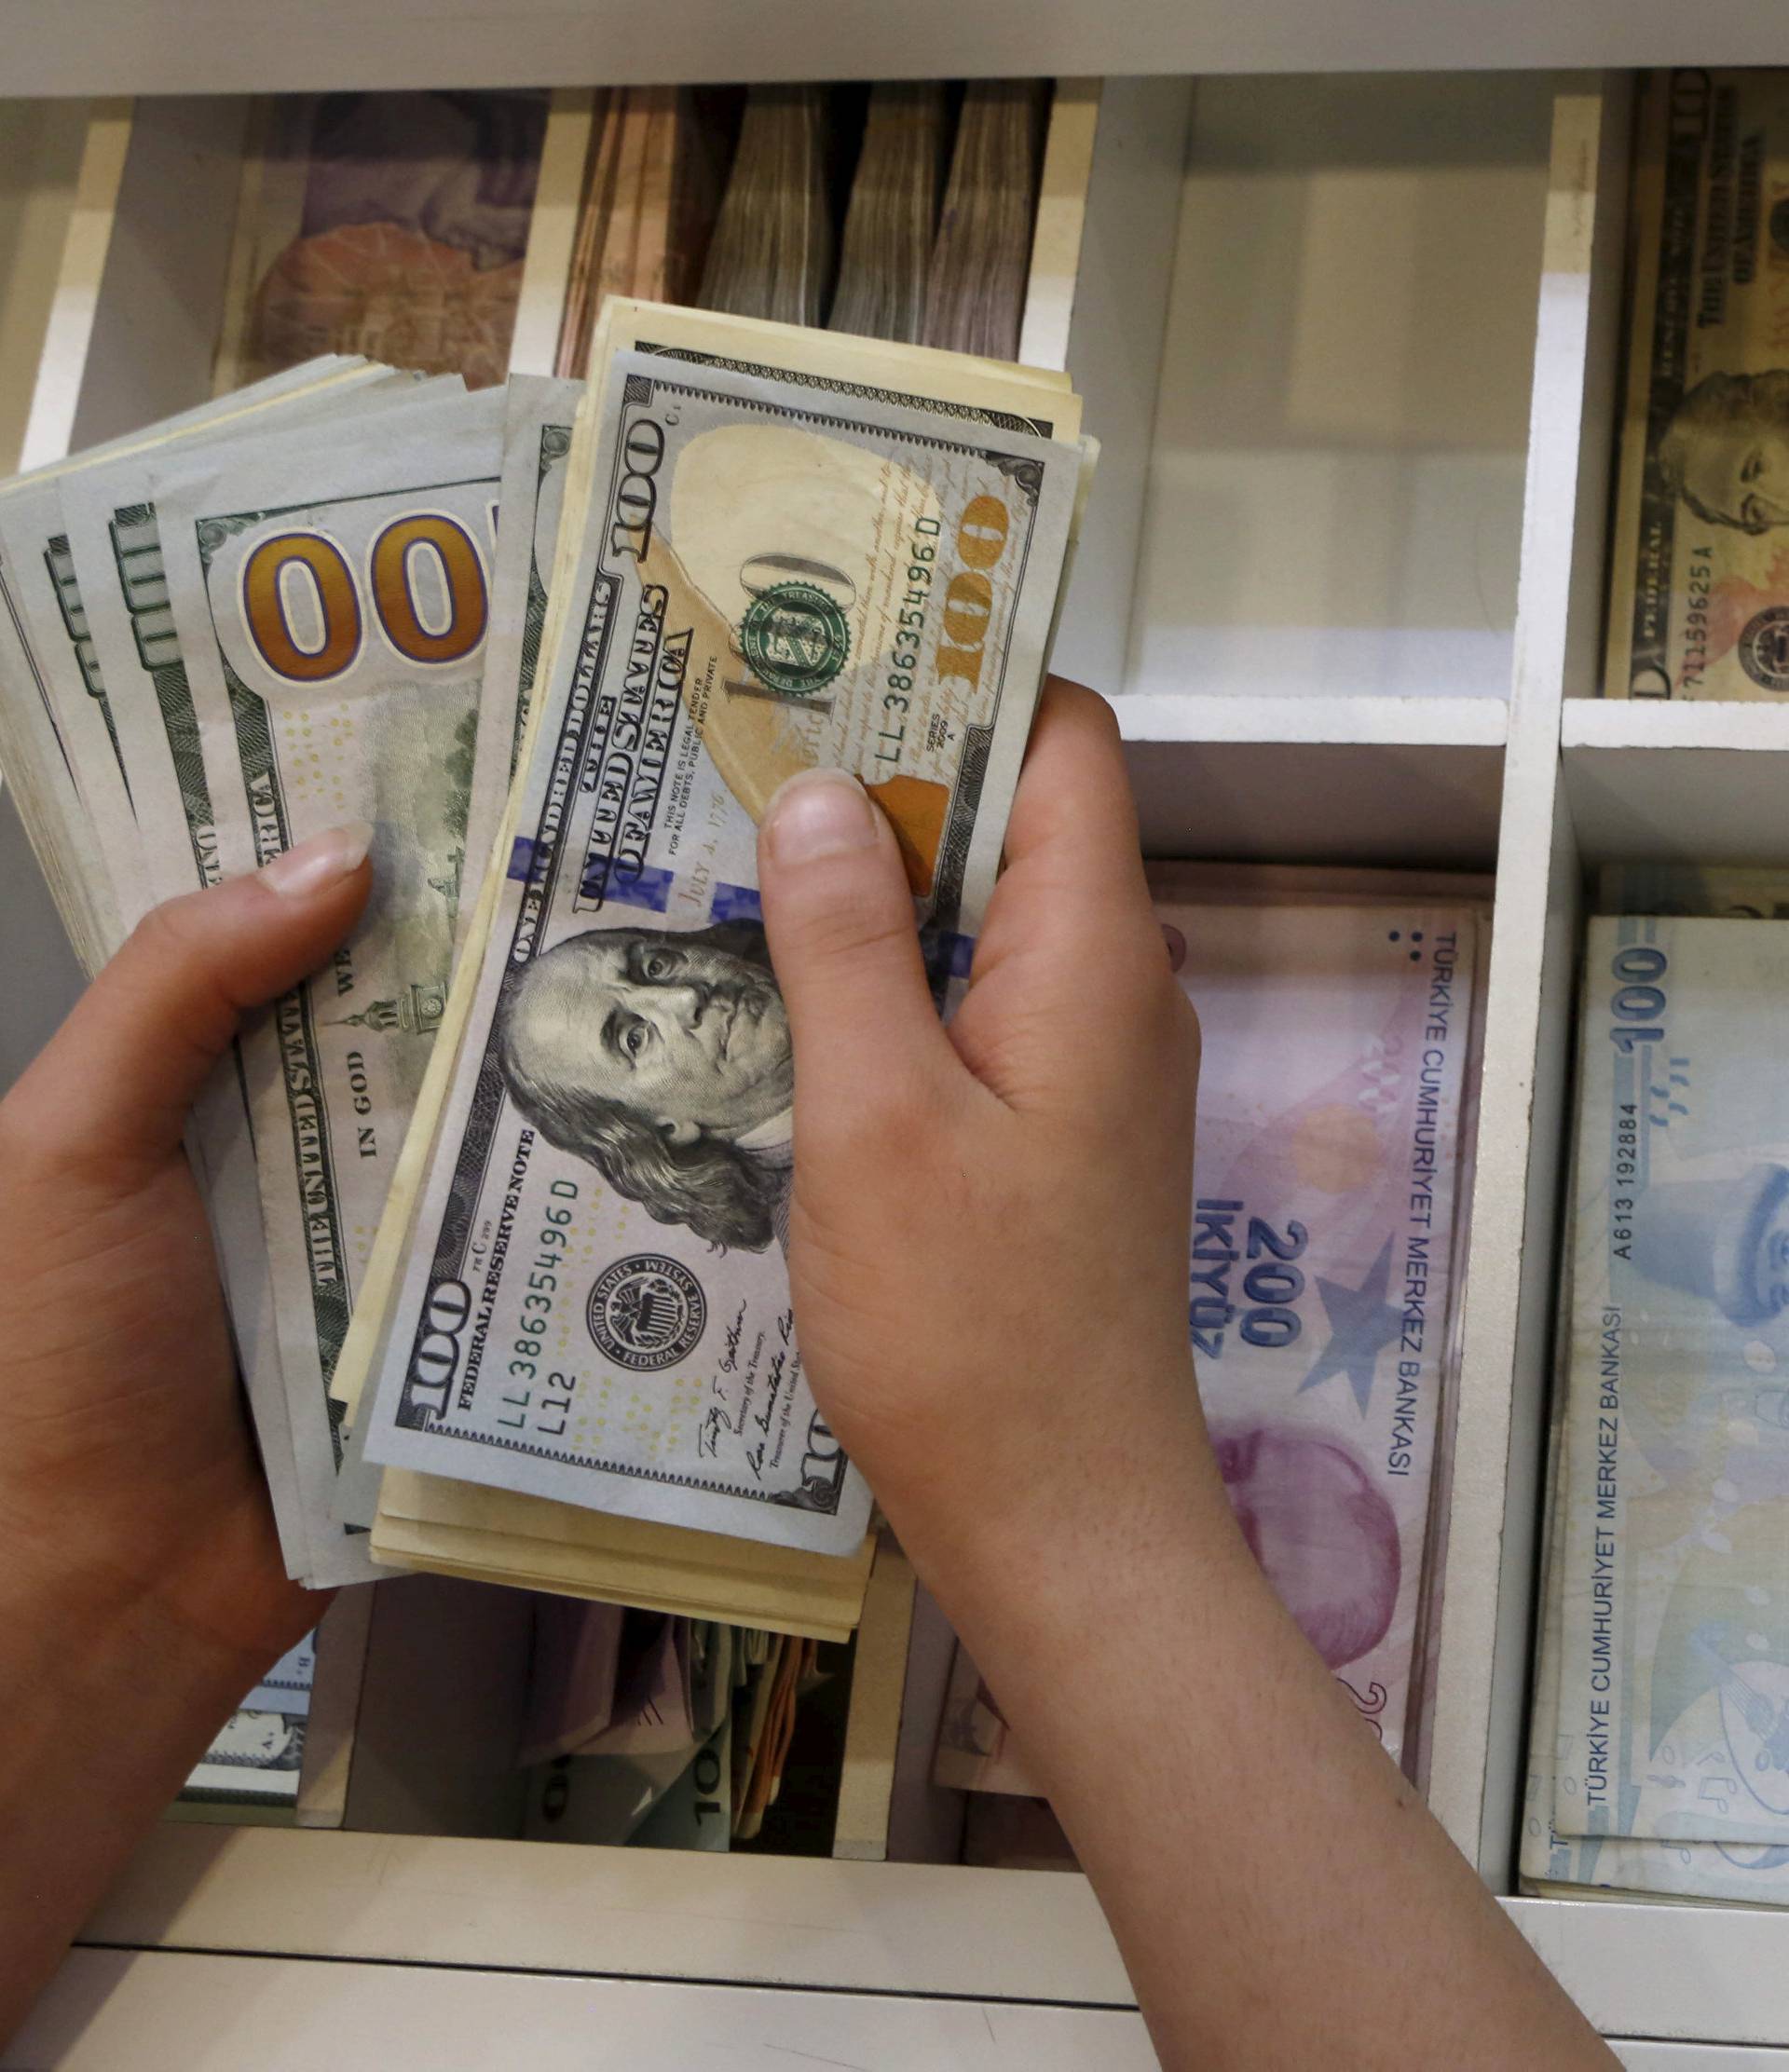 FILE PHOTO - A money changer counts U.S. dollar bills, with Turkish lira banknotes in the background, at an currency exchange office in central Istanbul